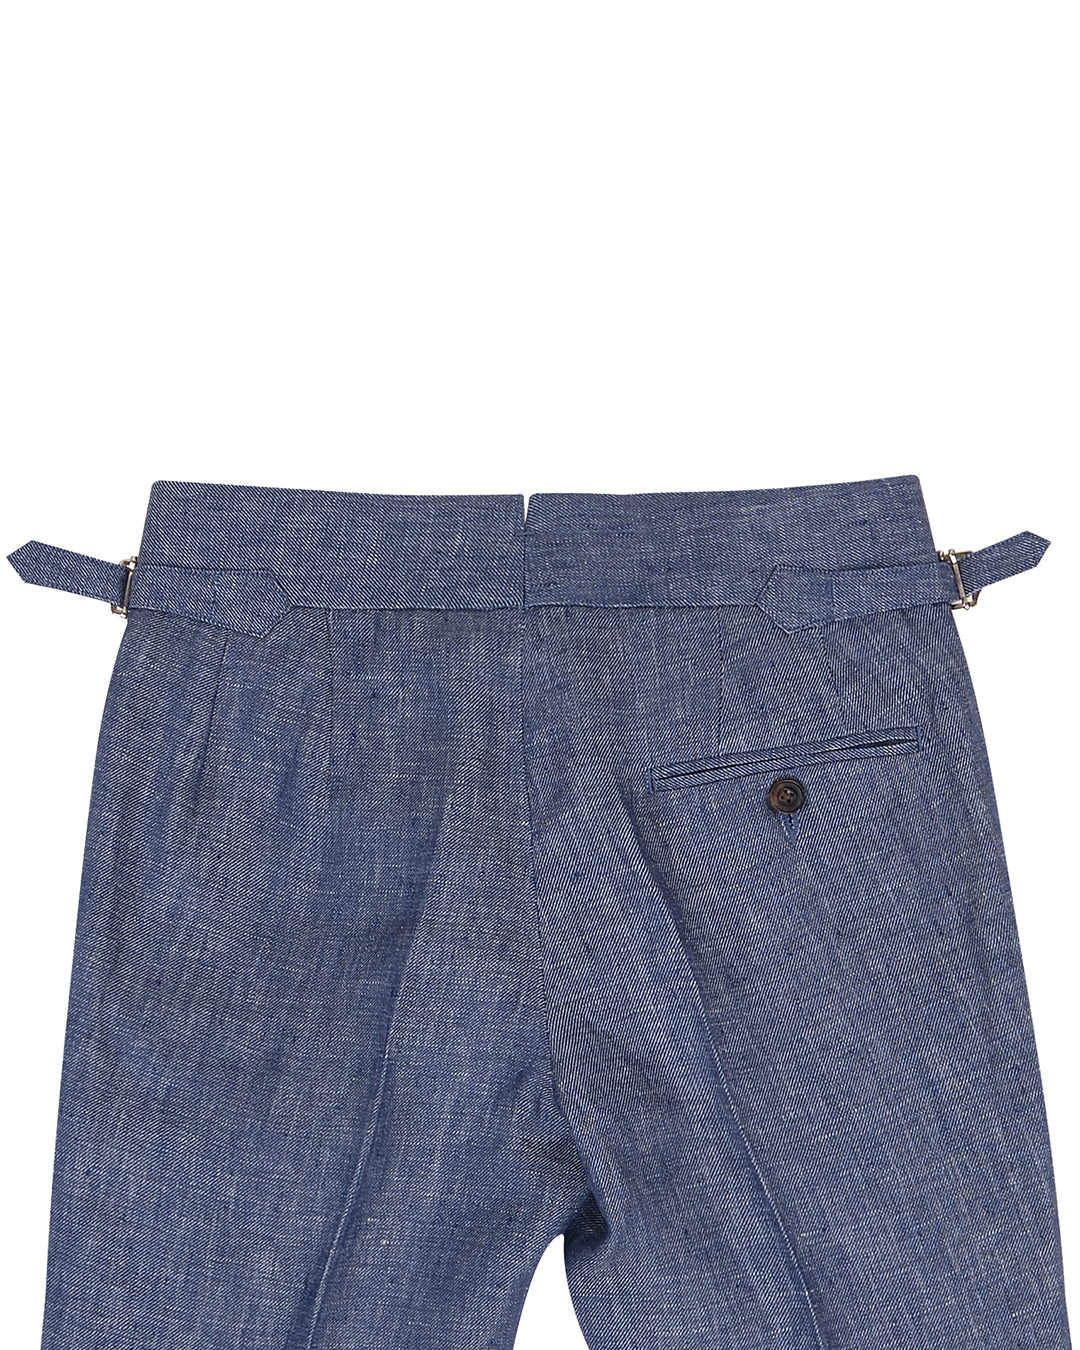 Back view of custom linen pants for men by Luxire in denim blue